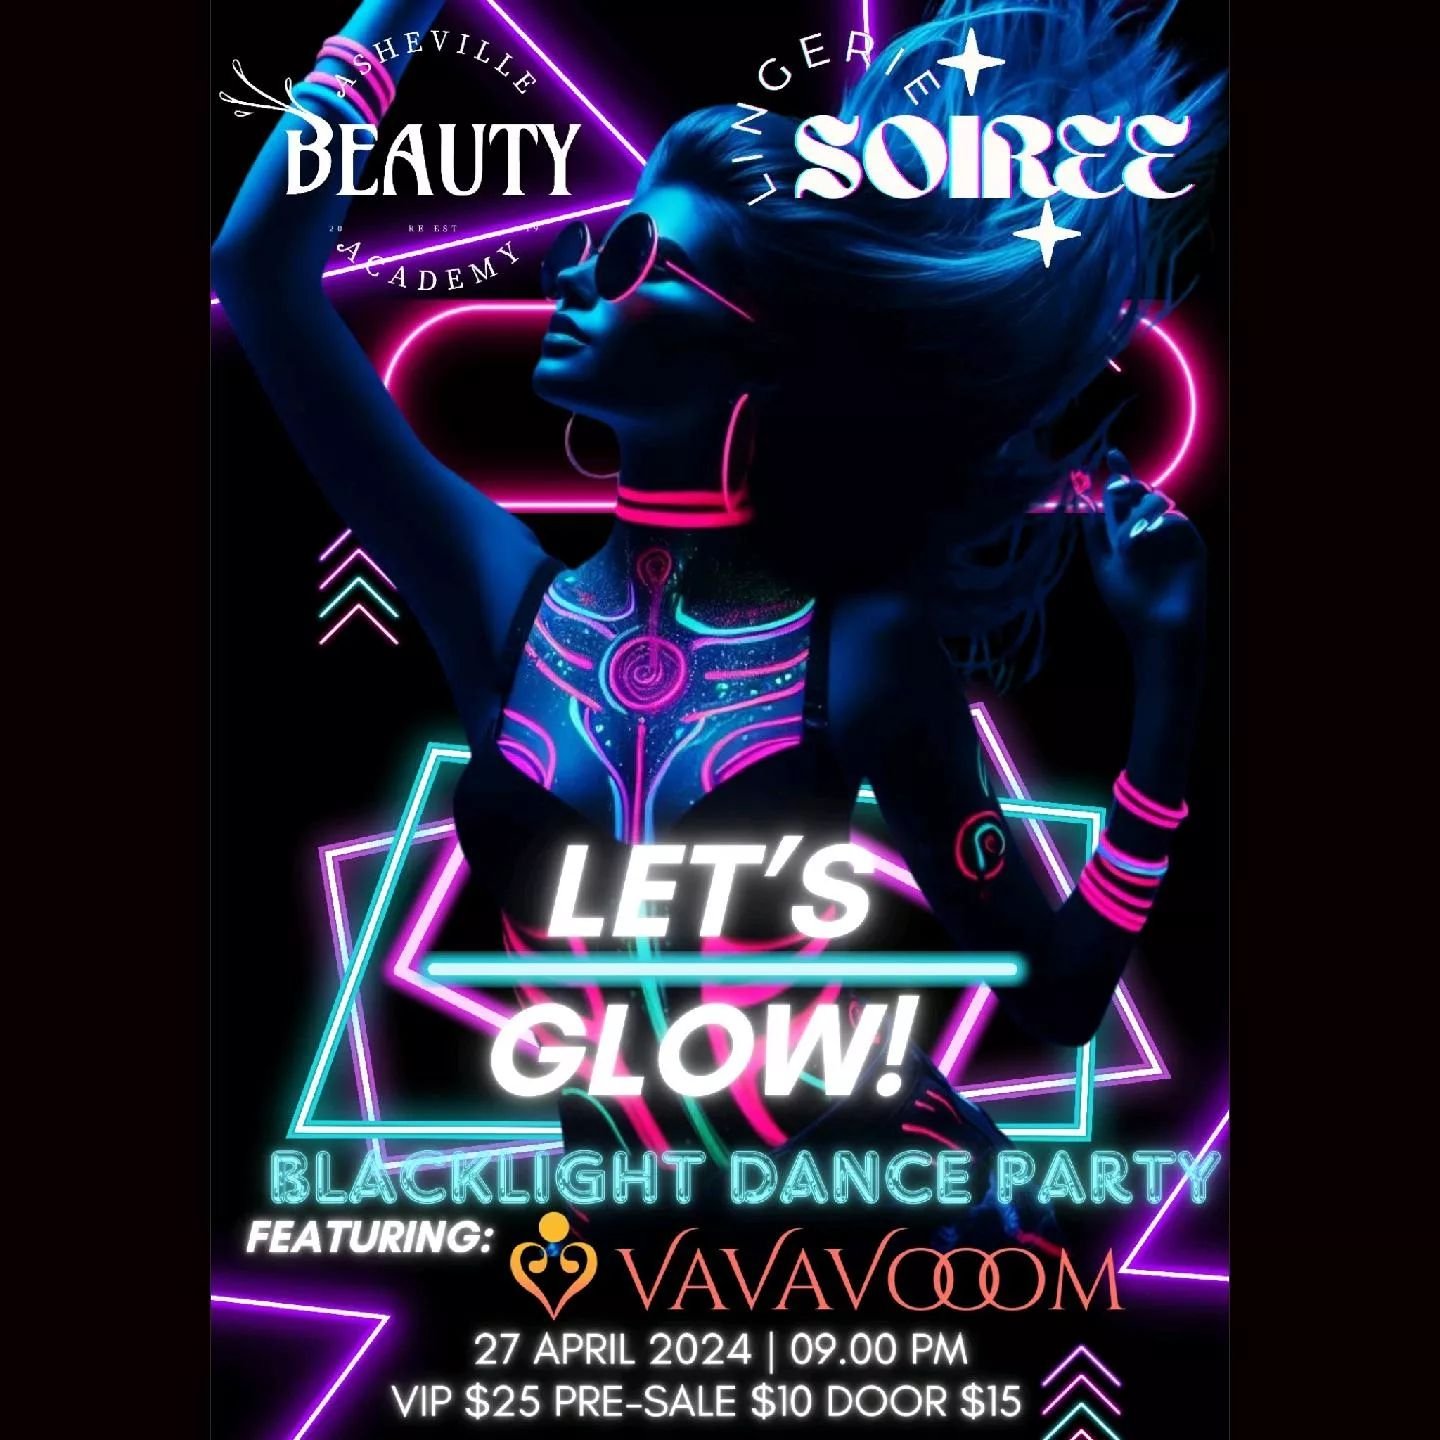 Only 3 more days til the Lingerie Soiree at Asheville Beauty Academy! This amazing event in benefitting a great cause- Pro-Choice NC!!!

Come in and get your sexy on with some amazing glow pieces to wear to the party! Tickets on sale now! 

@prochoic